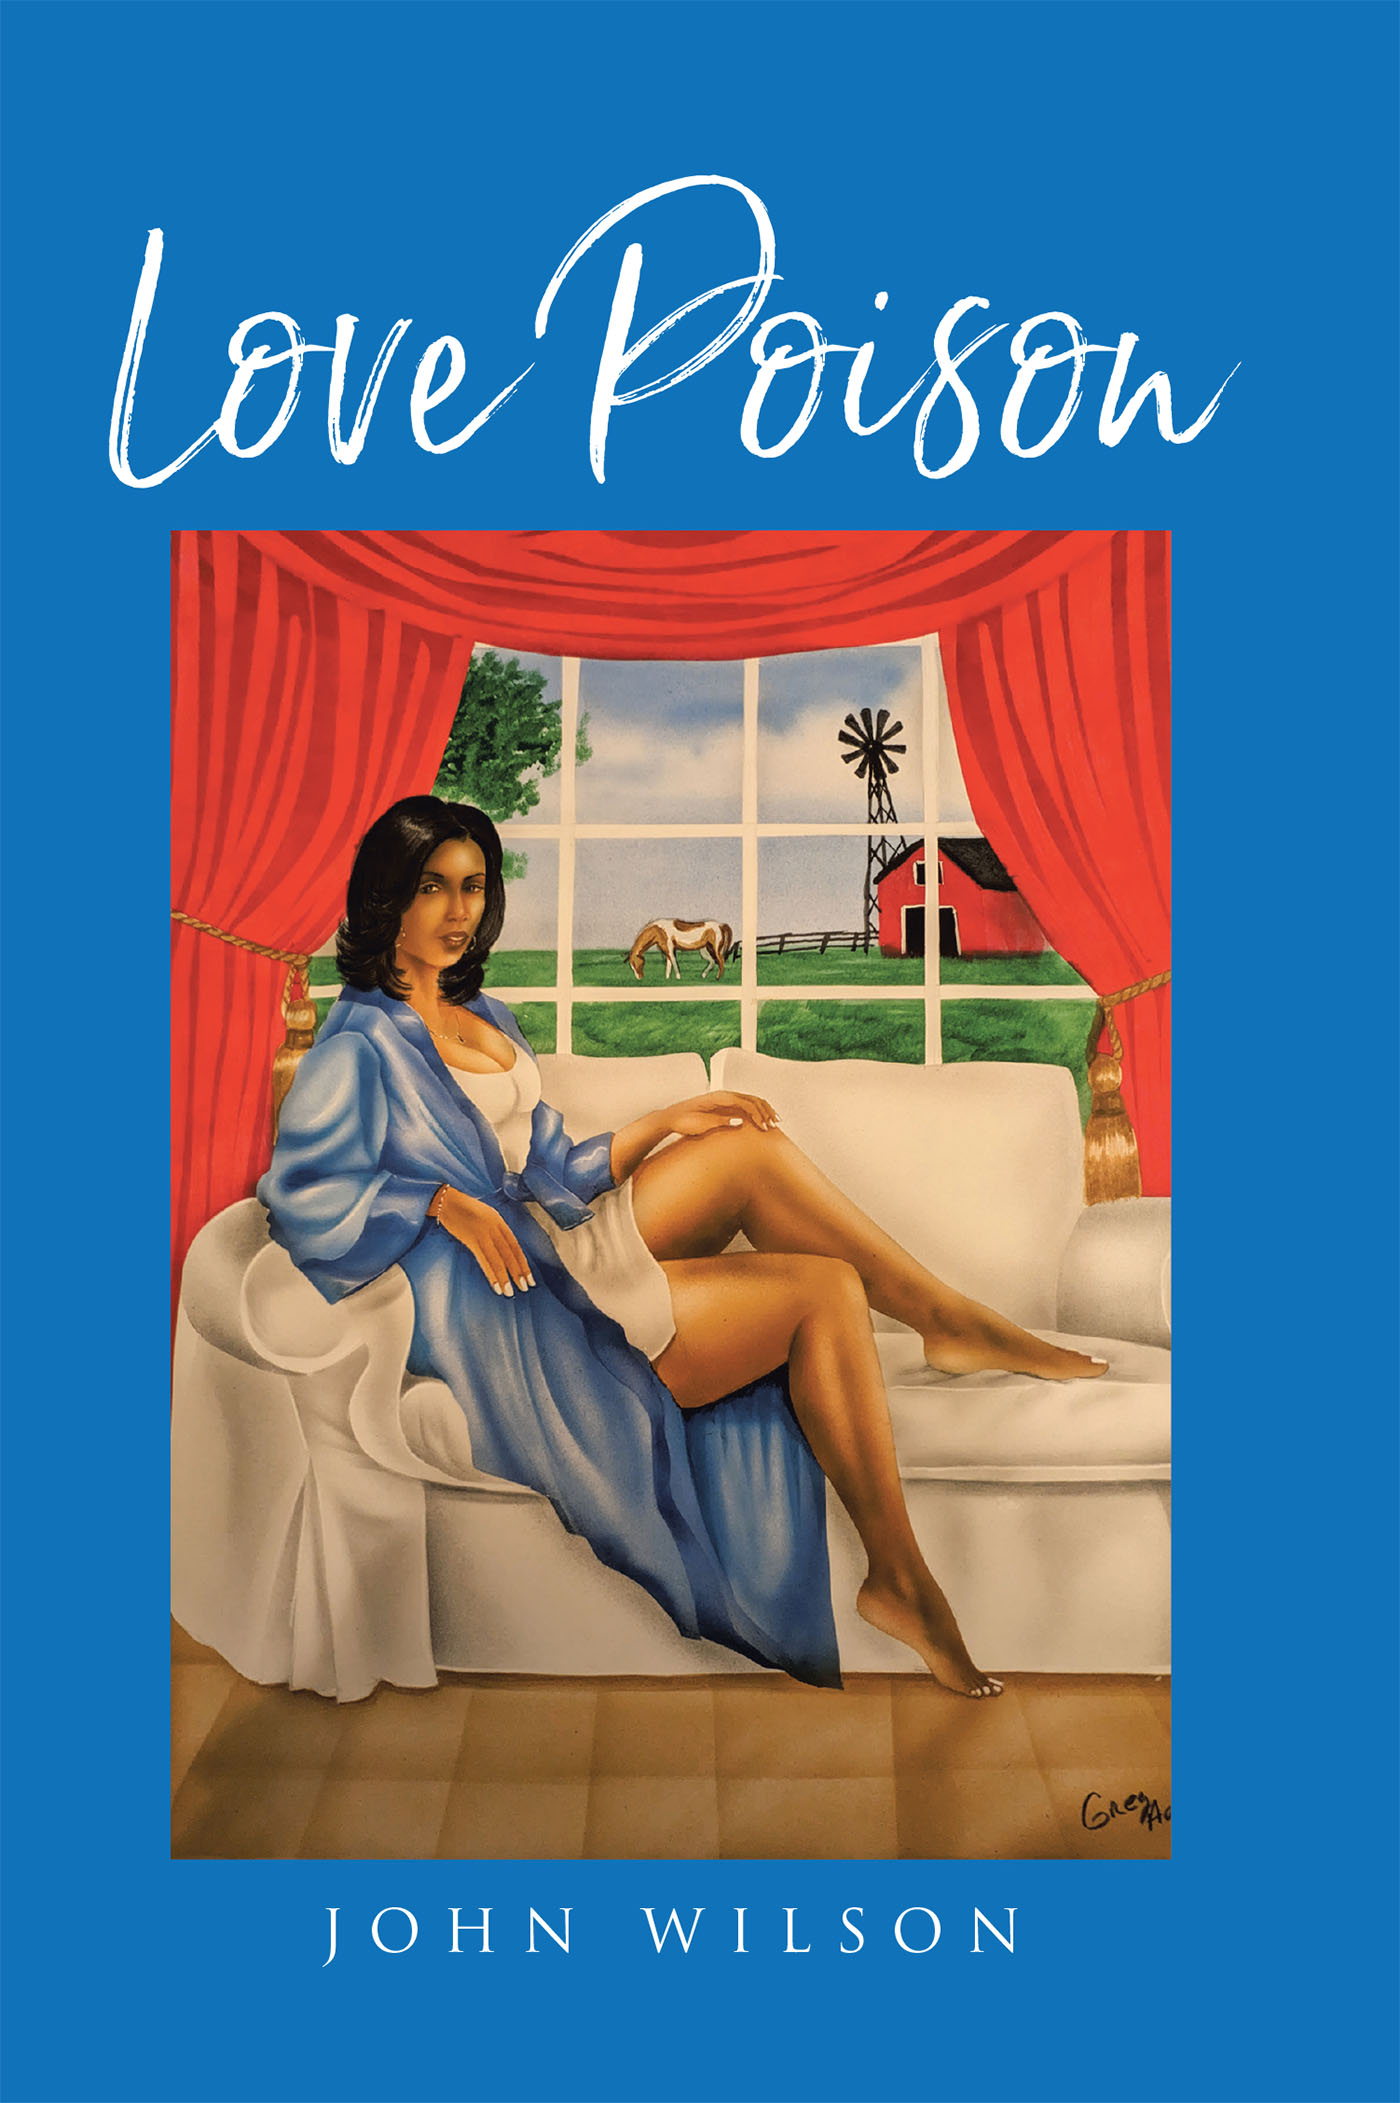 Author John Wilson’s New Book, "Love Poison," Follows a Passionate Love Affair Between a Thirty-Year-Old Woman and a Boy in His Mid-Teens